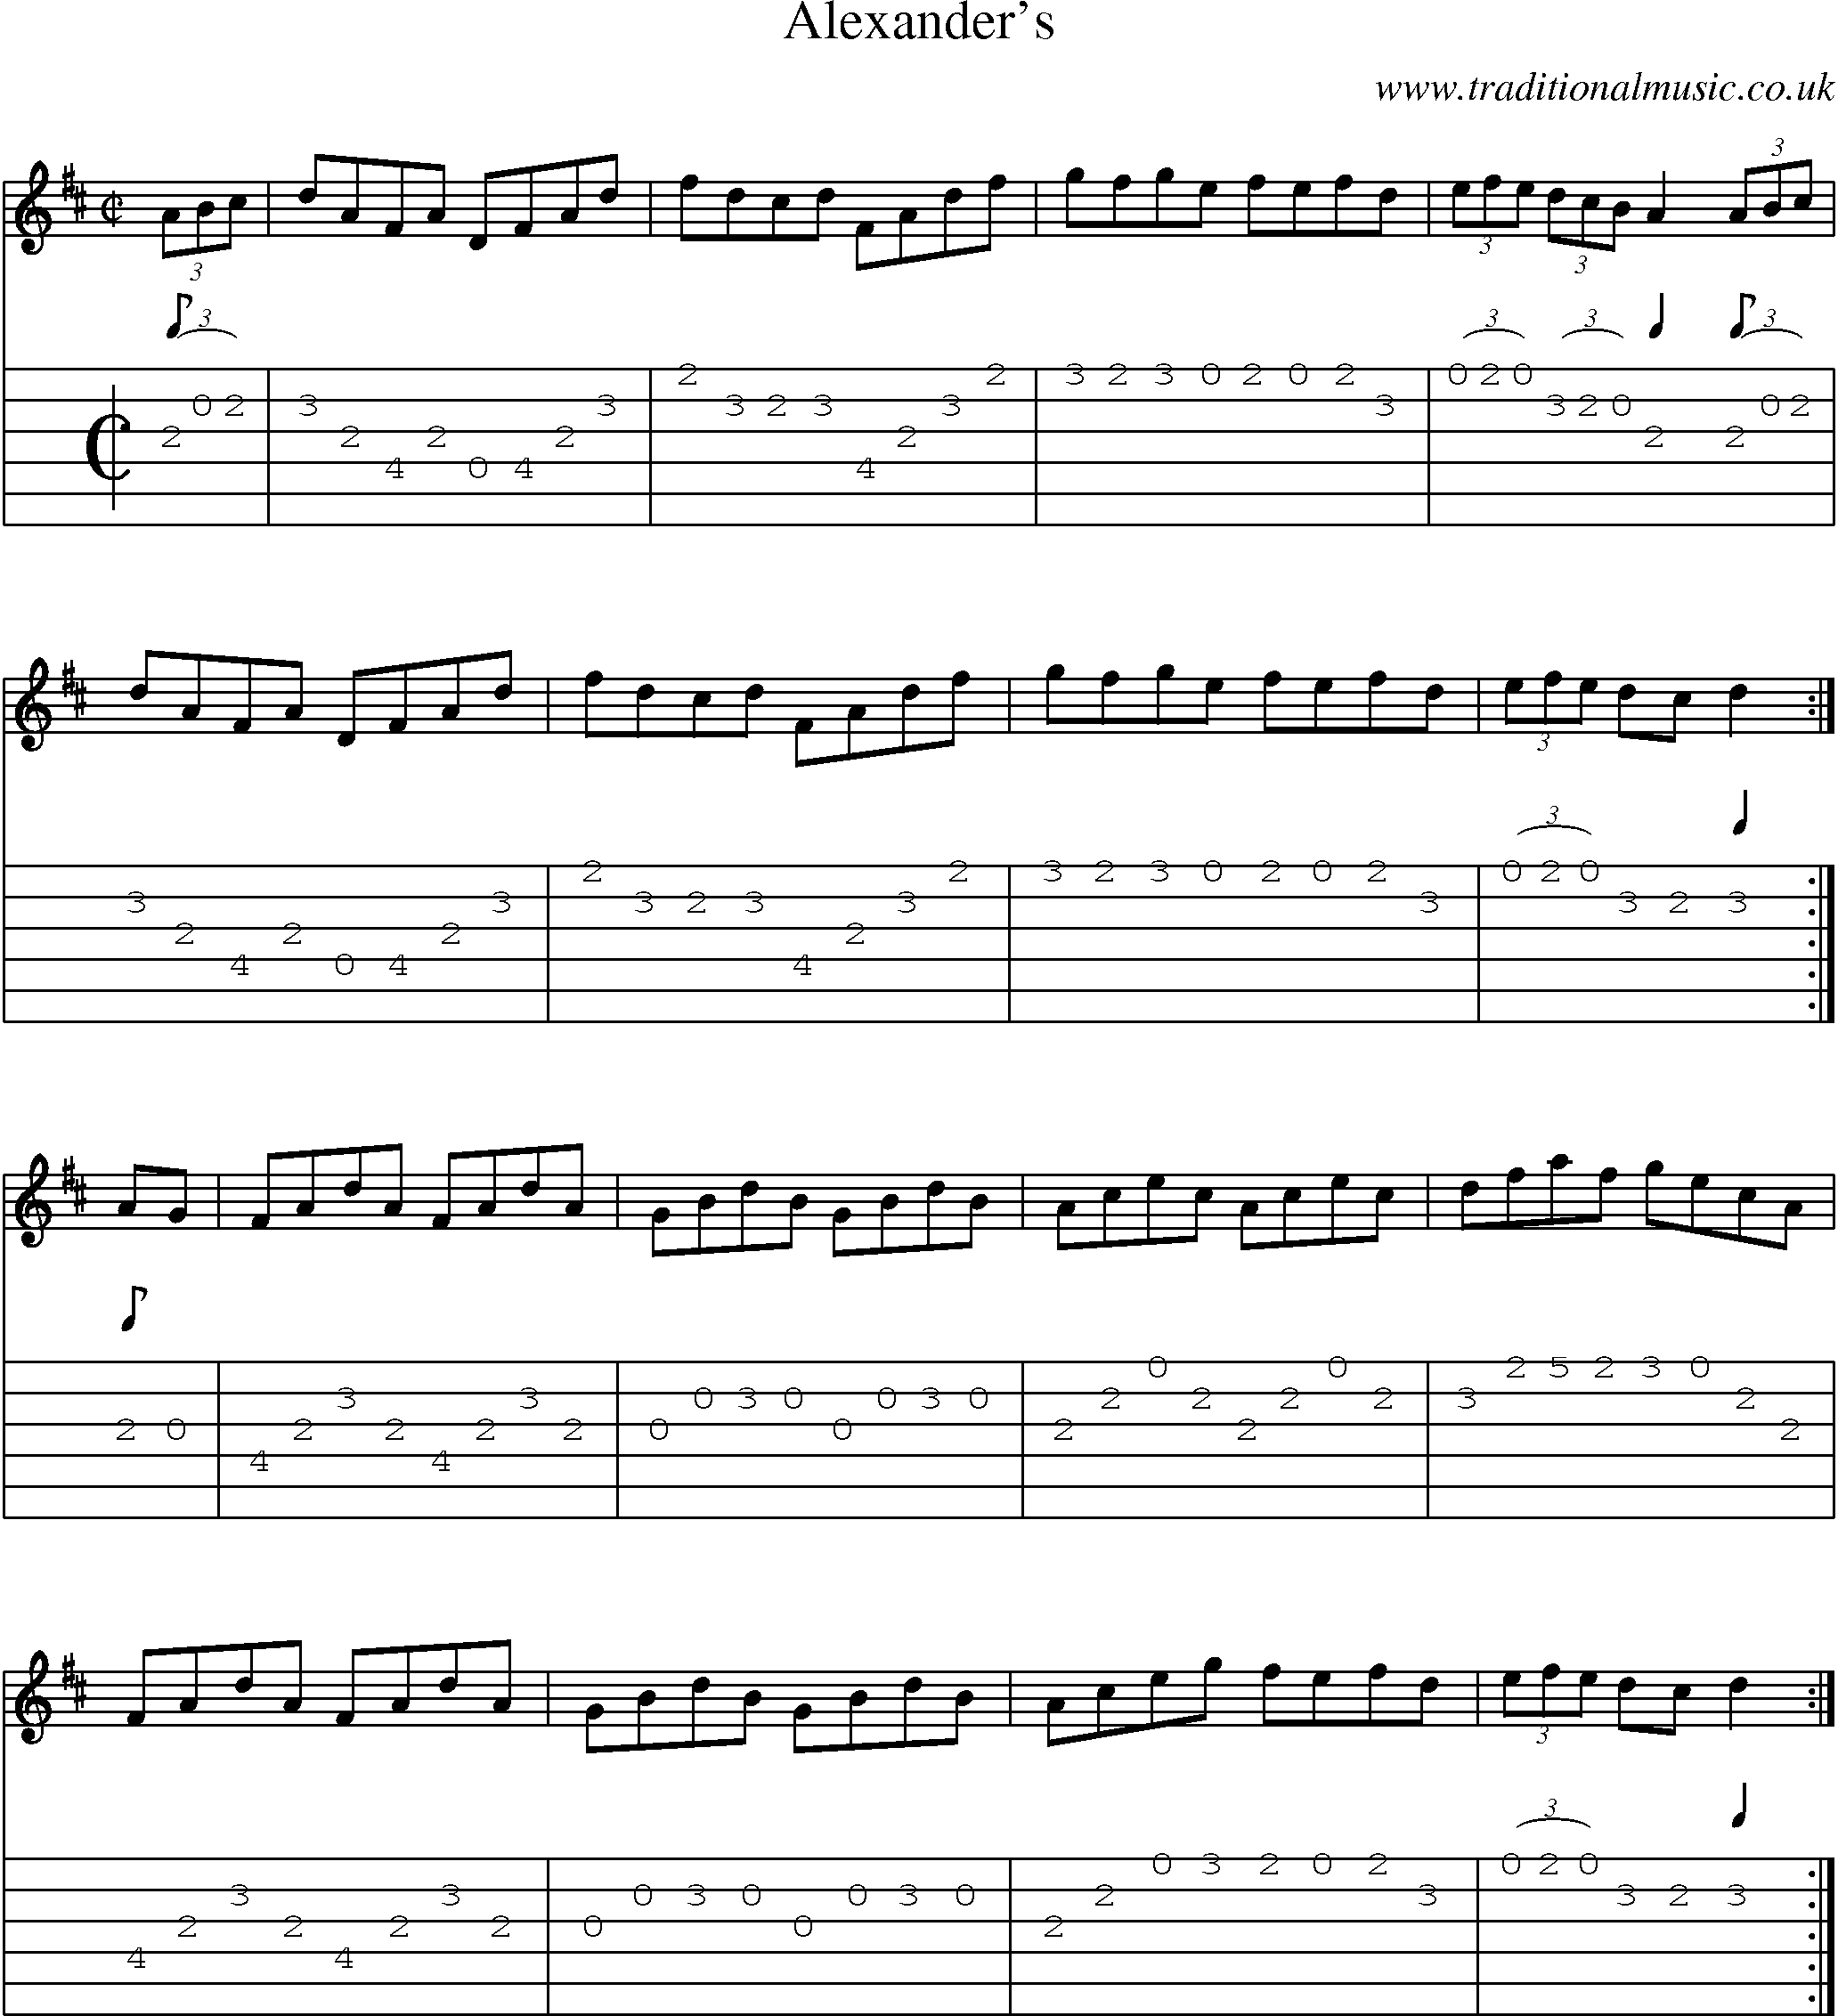 Music Score and Guitar Tabs for Alexanders